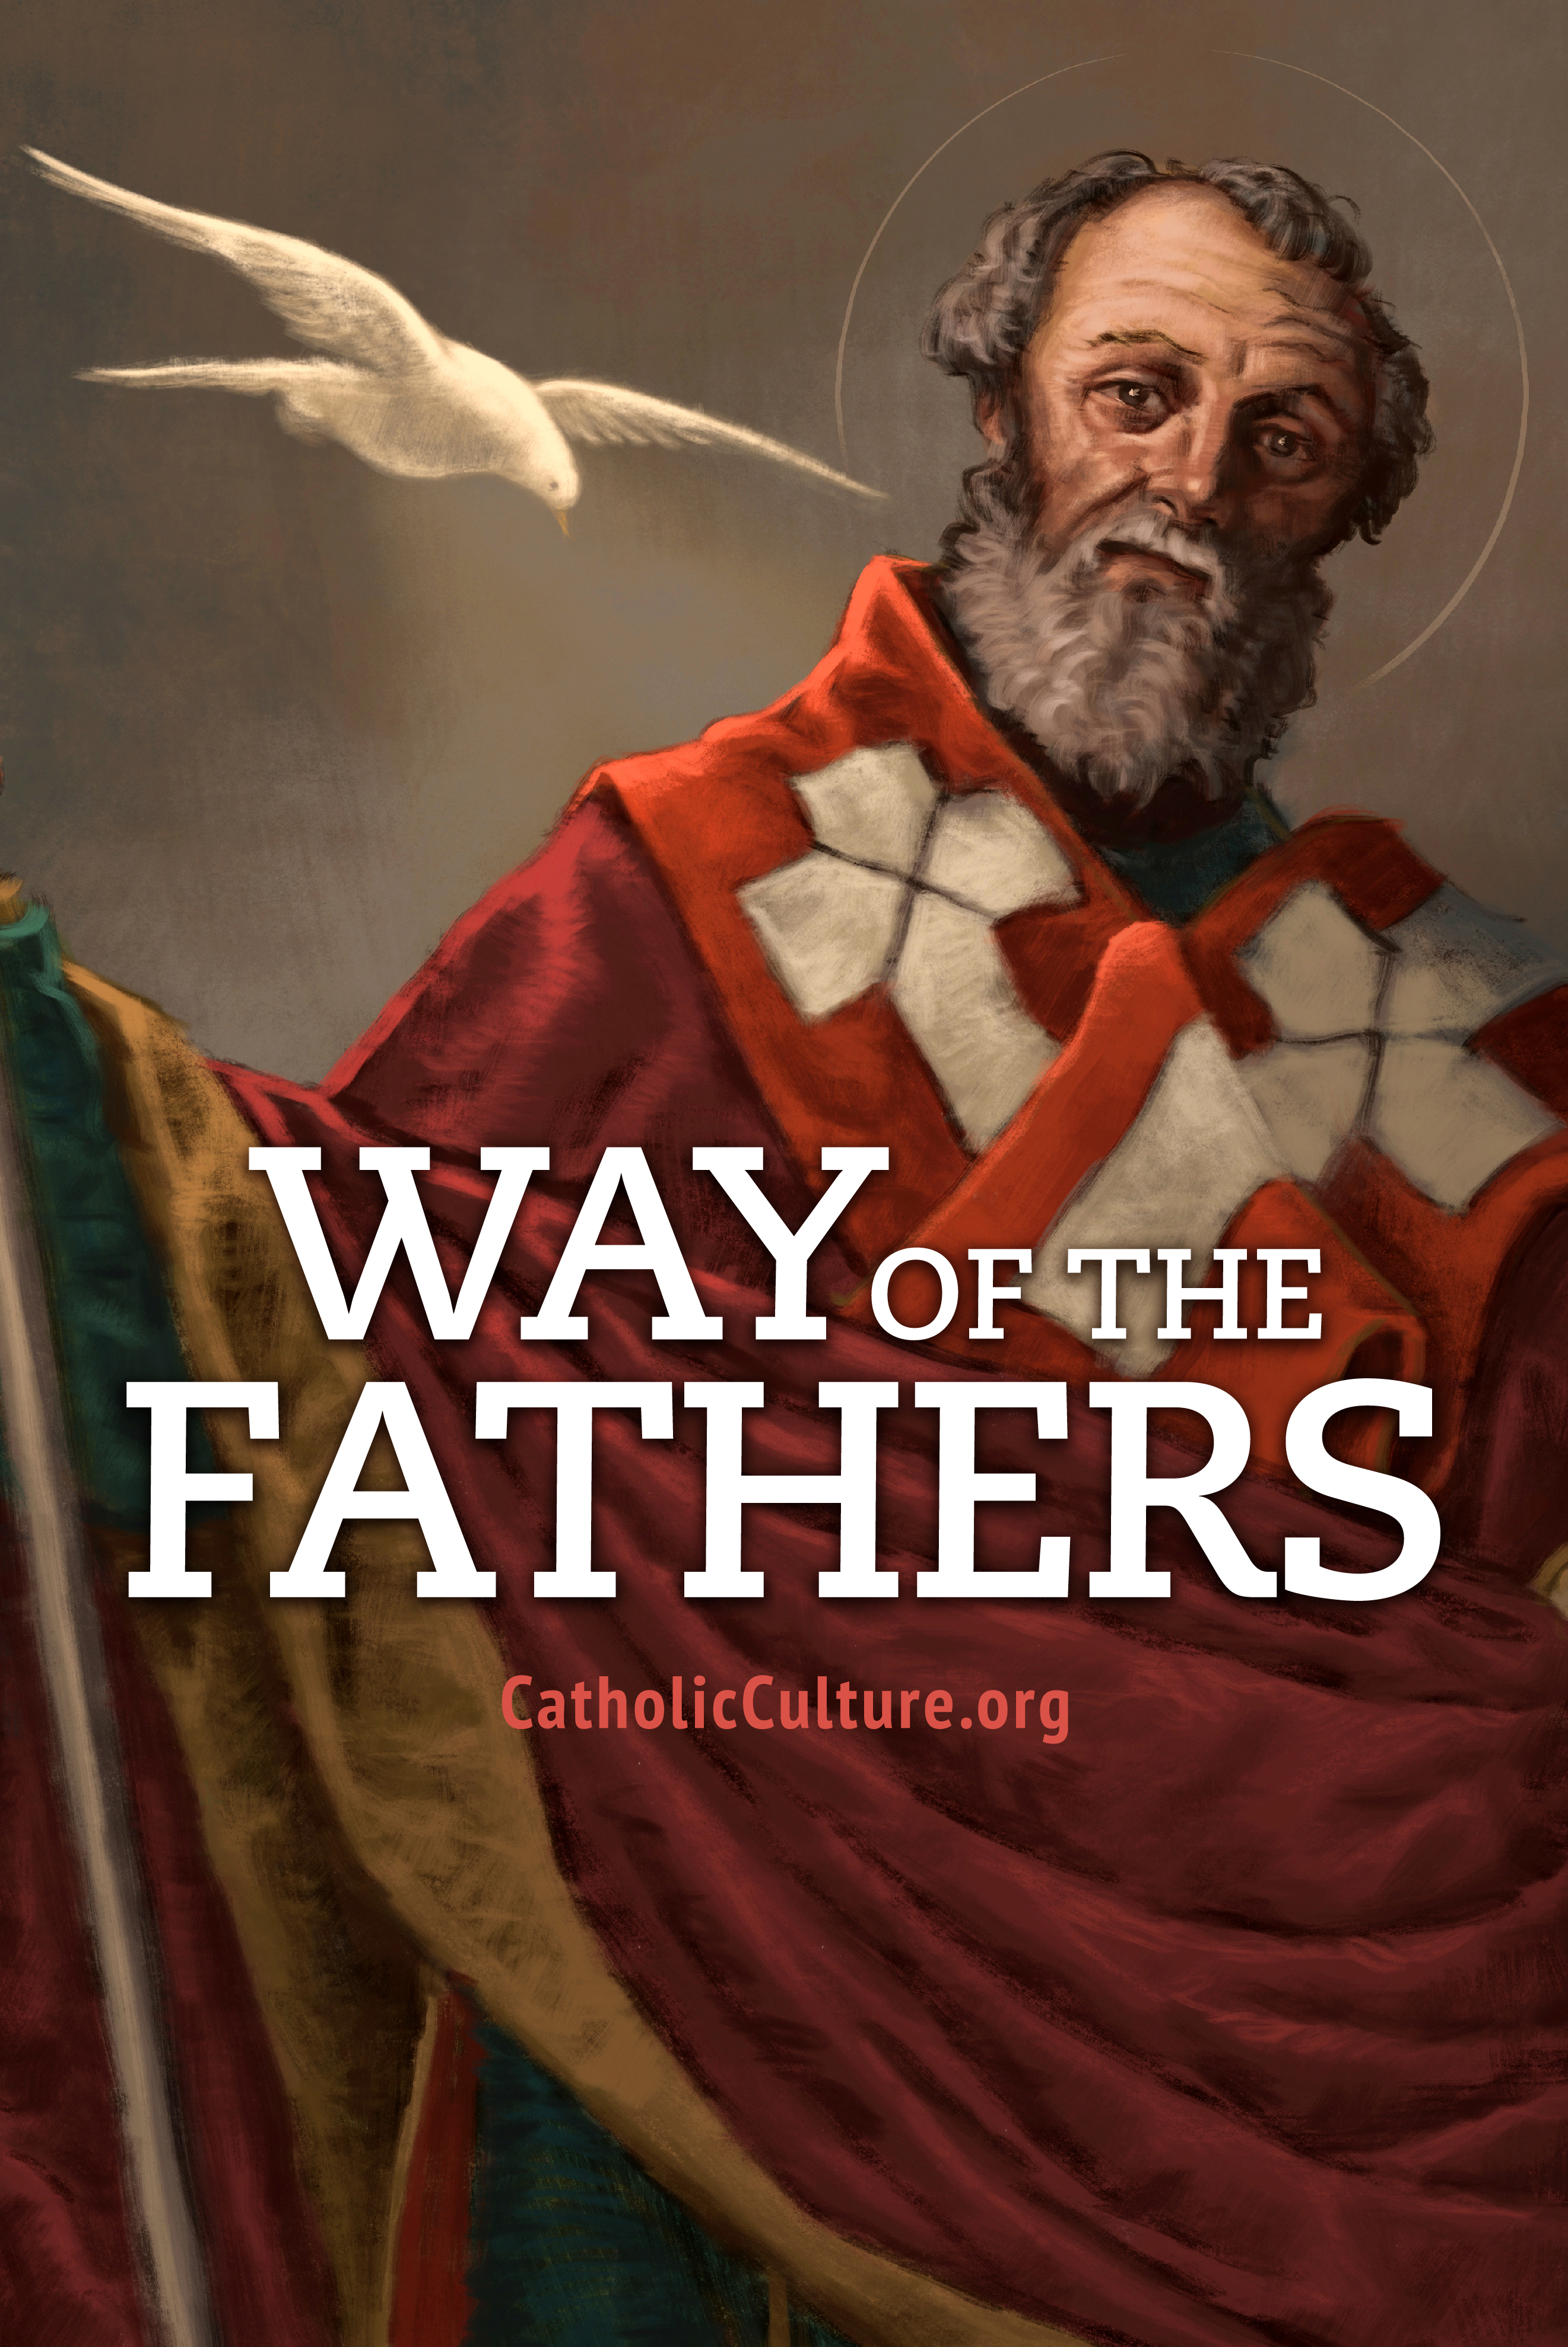 Way of the Fathers